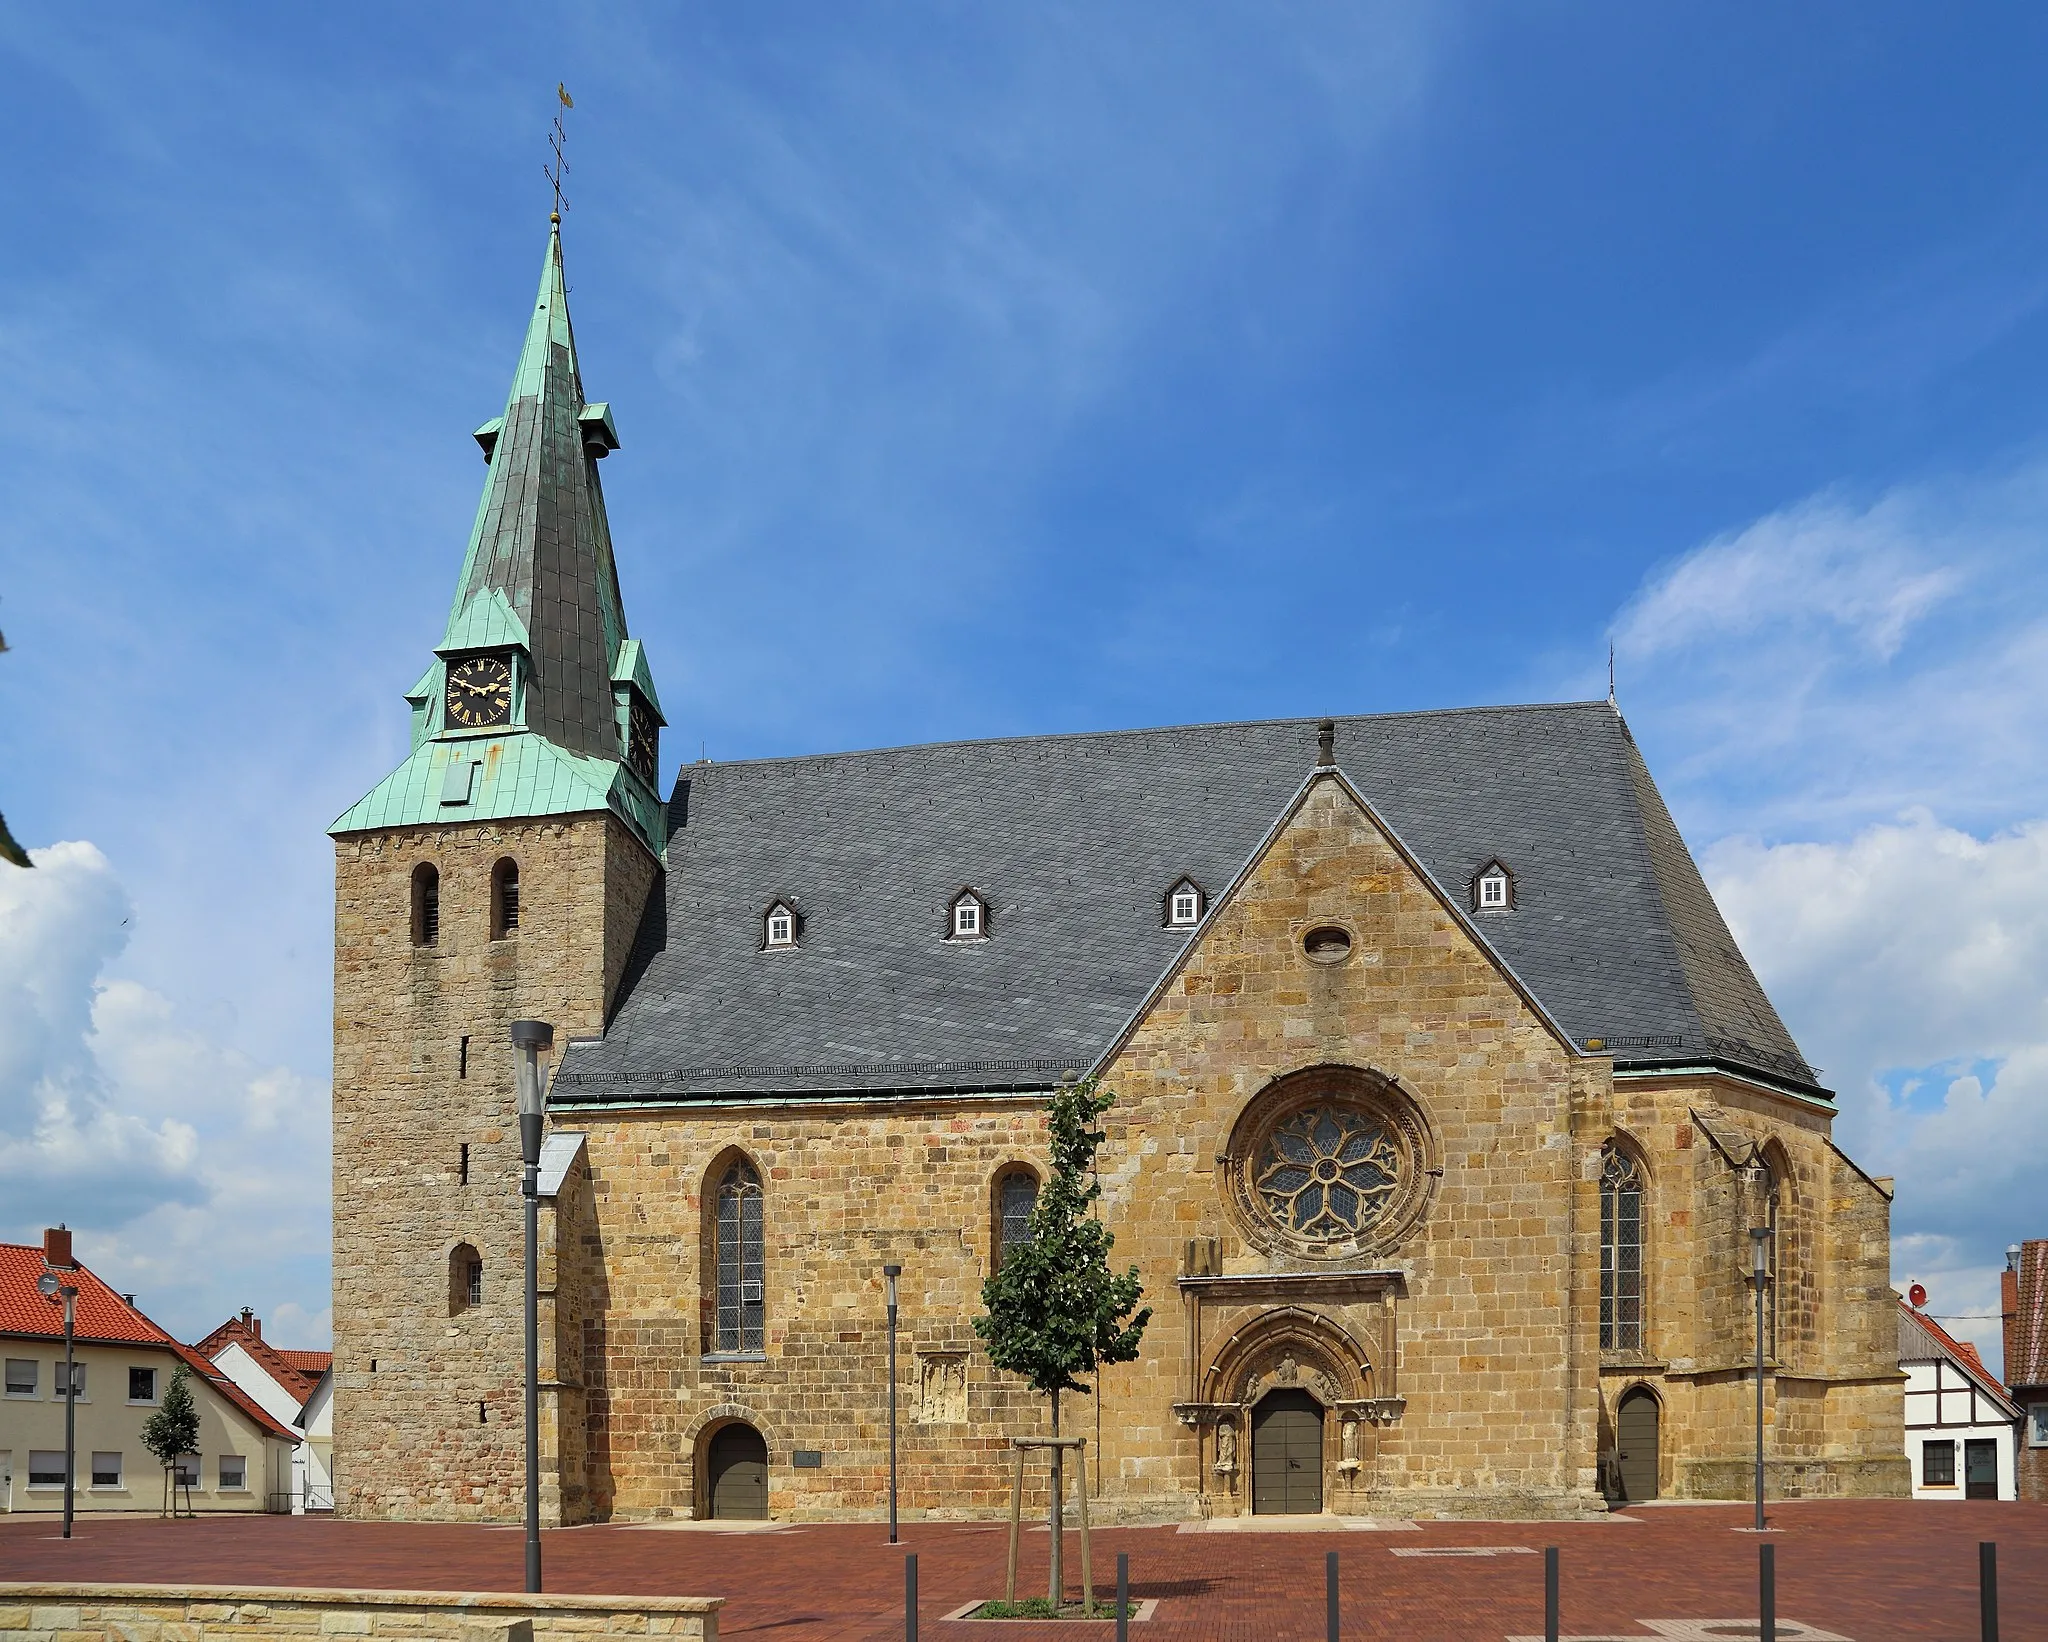 Photo showing: The Protestant City Church (Evangelische Stadtkirche) in Westerkappeln, Kreis Steinfurt, North Rhine-Westphalia, Germany. The church is a listed cultural heritage monument.